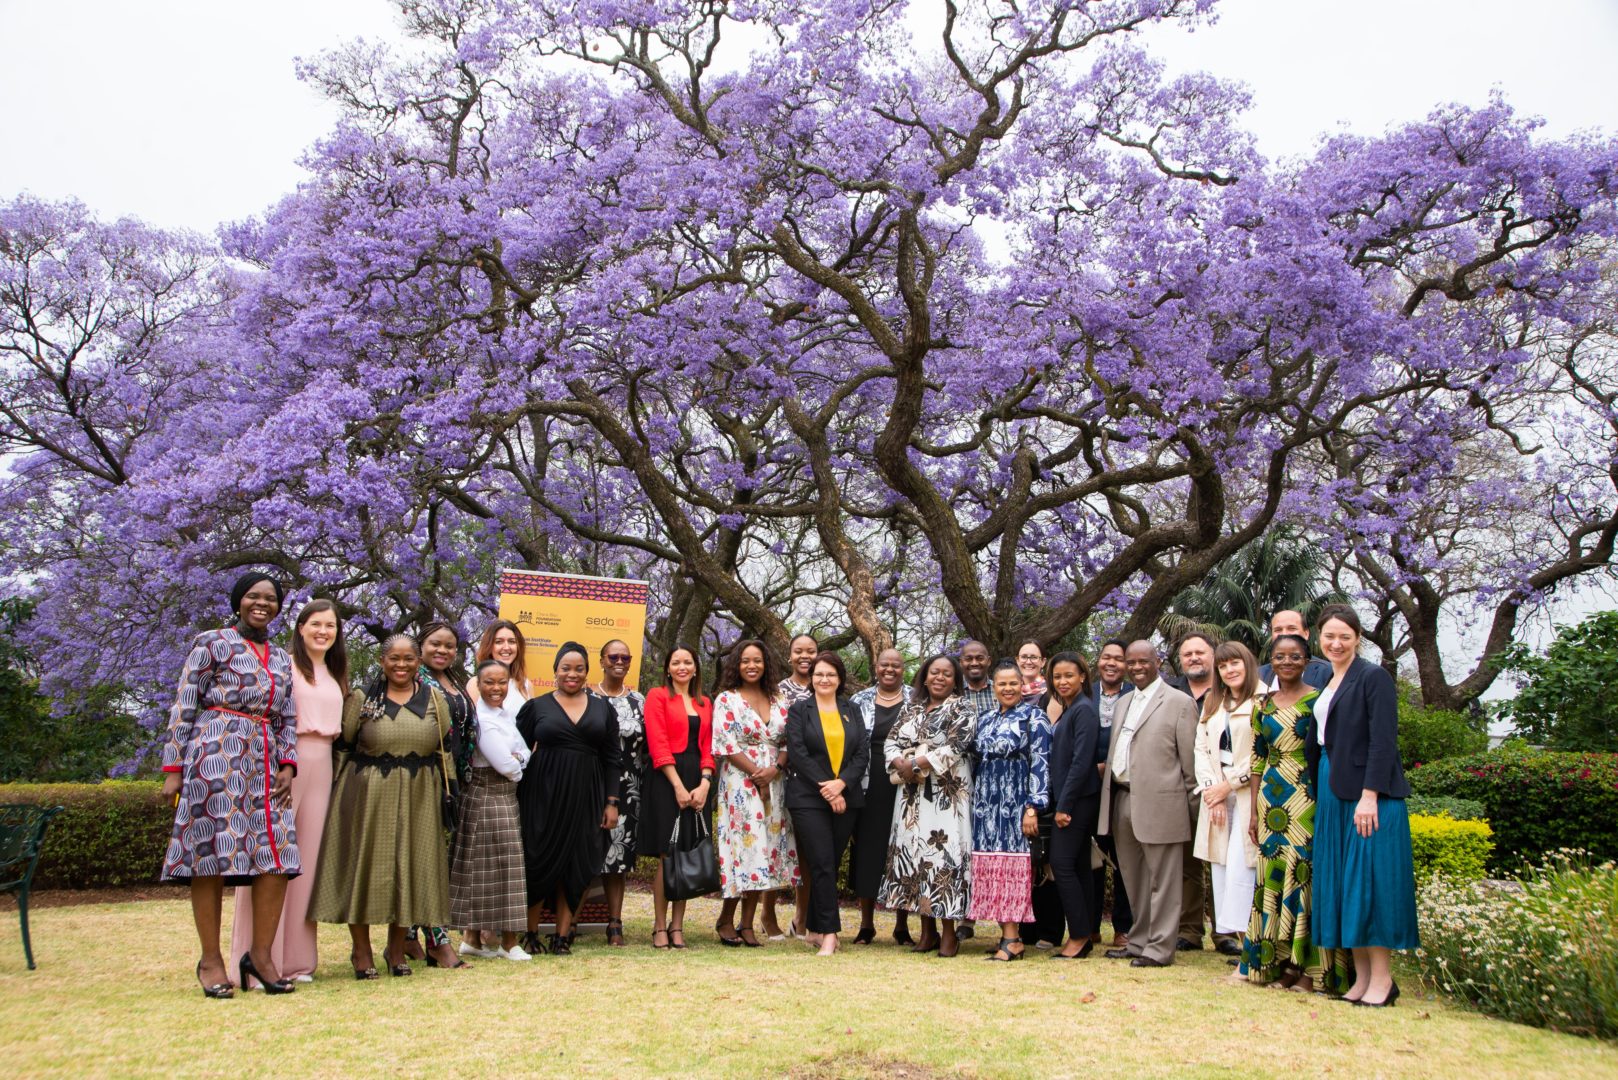 Event at the British High Commissioner’s residence, South Africa